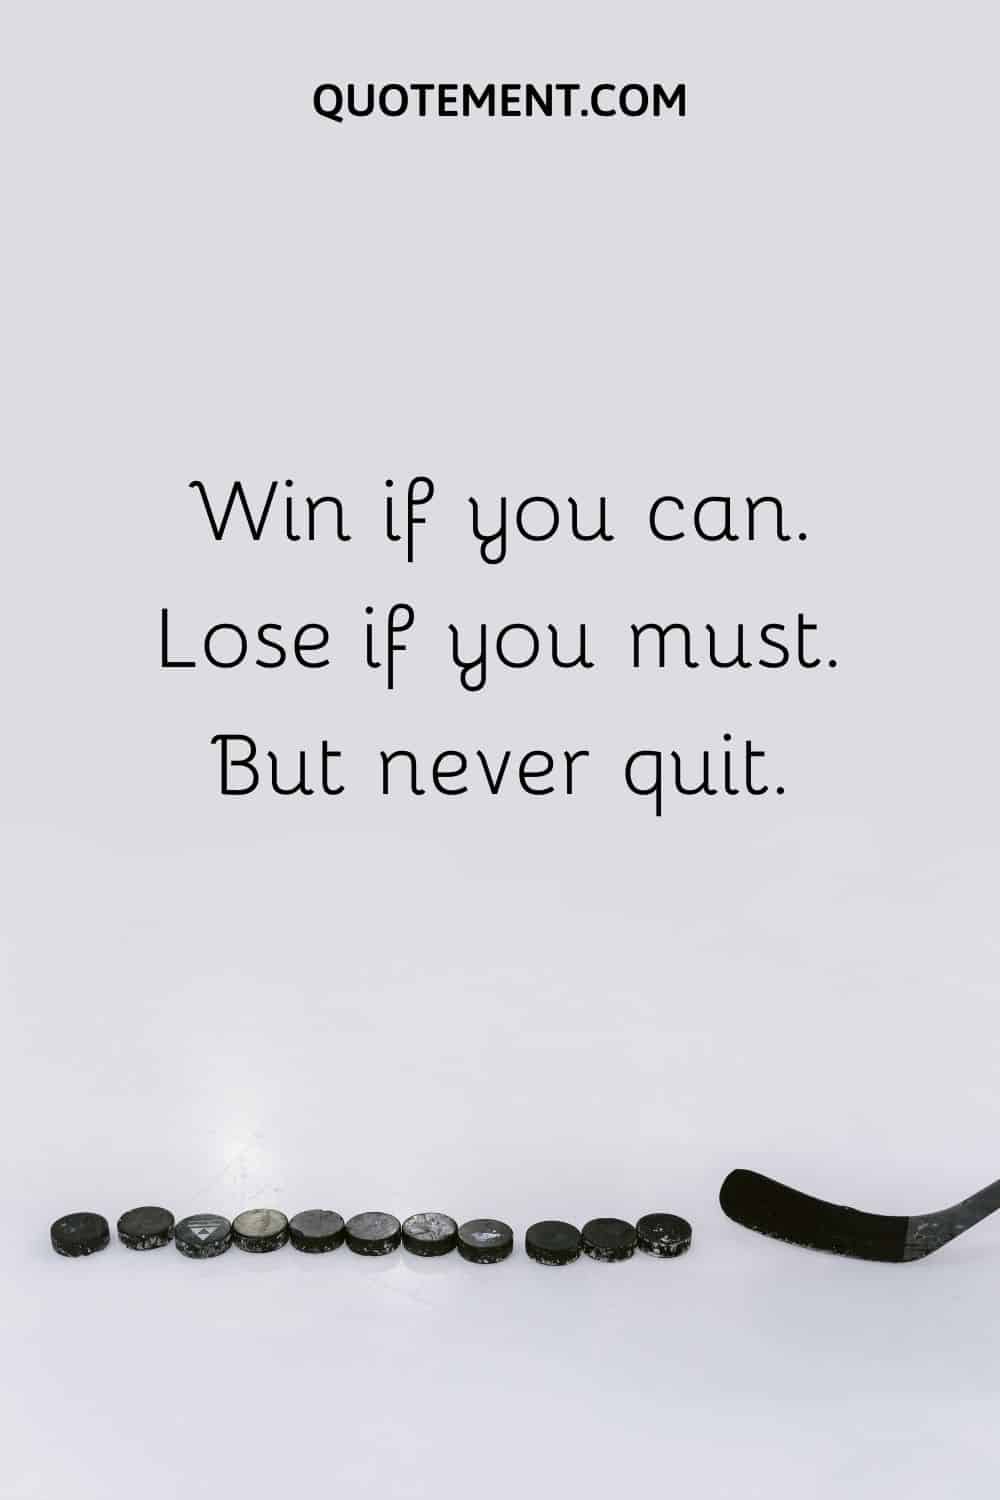 Win if you can. Lose if you must. But never quit.